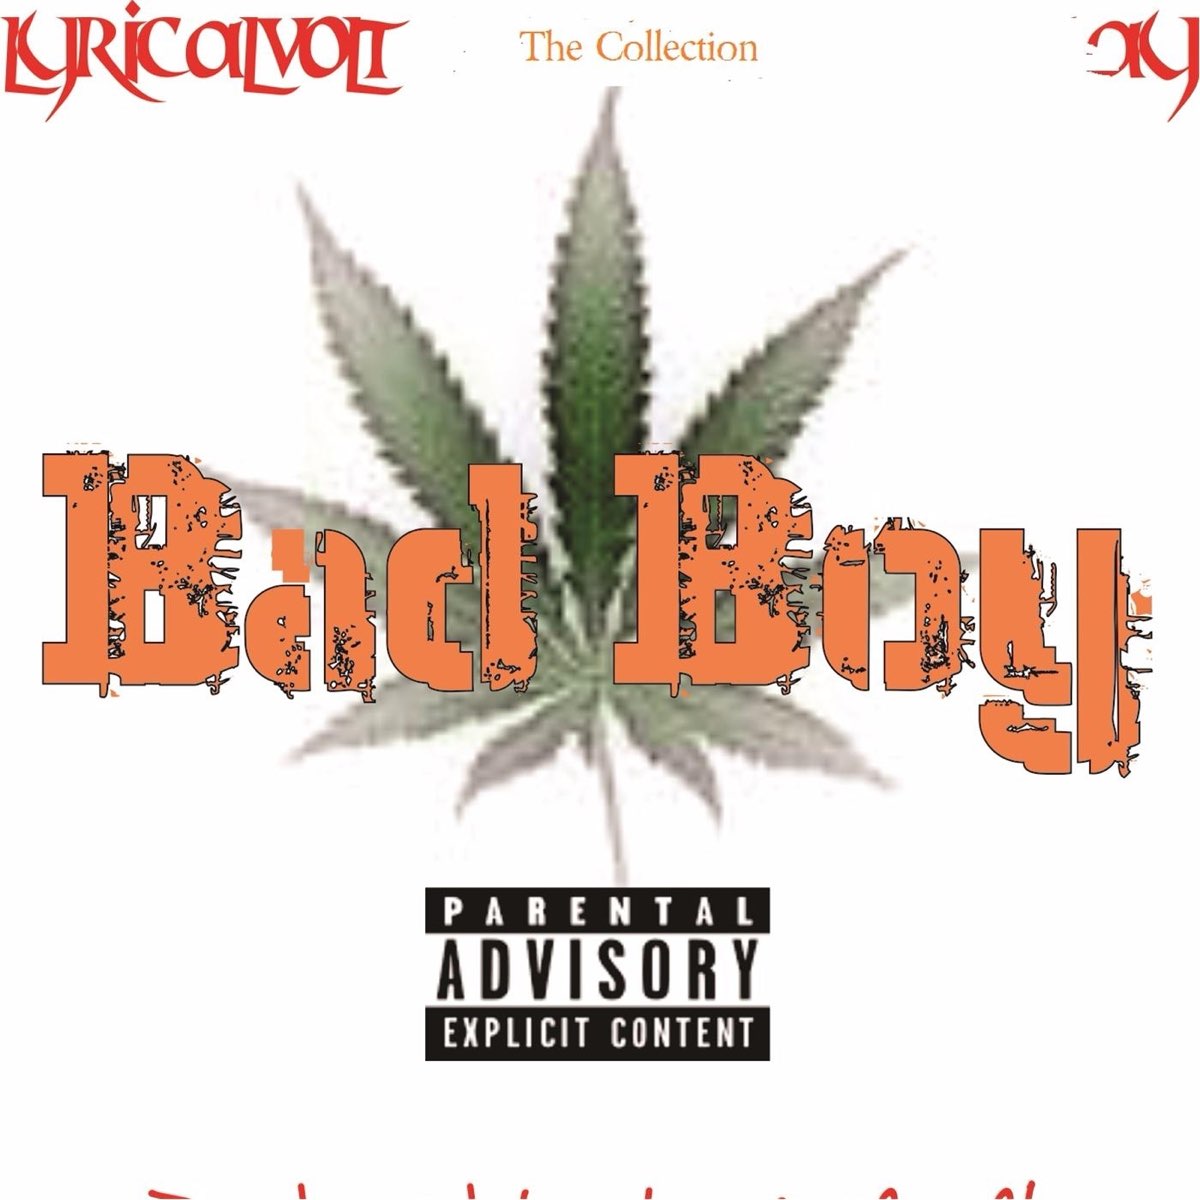 Bad collection. Mp3 collection album.